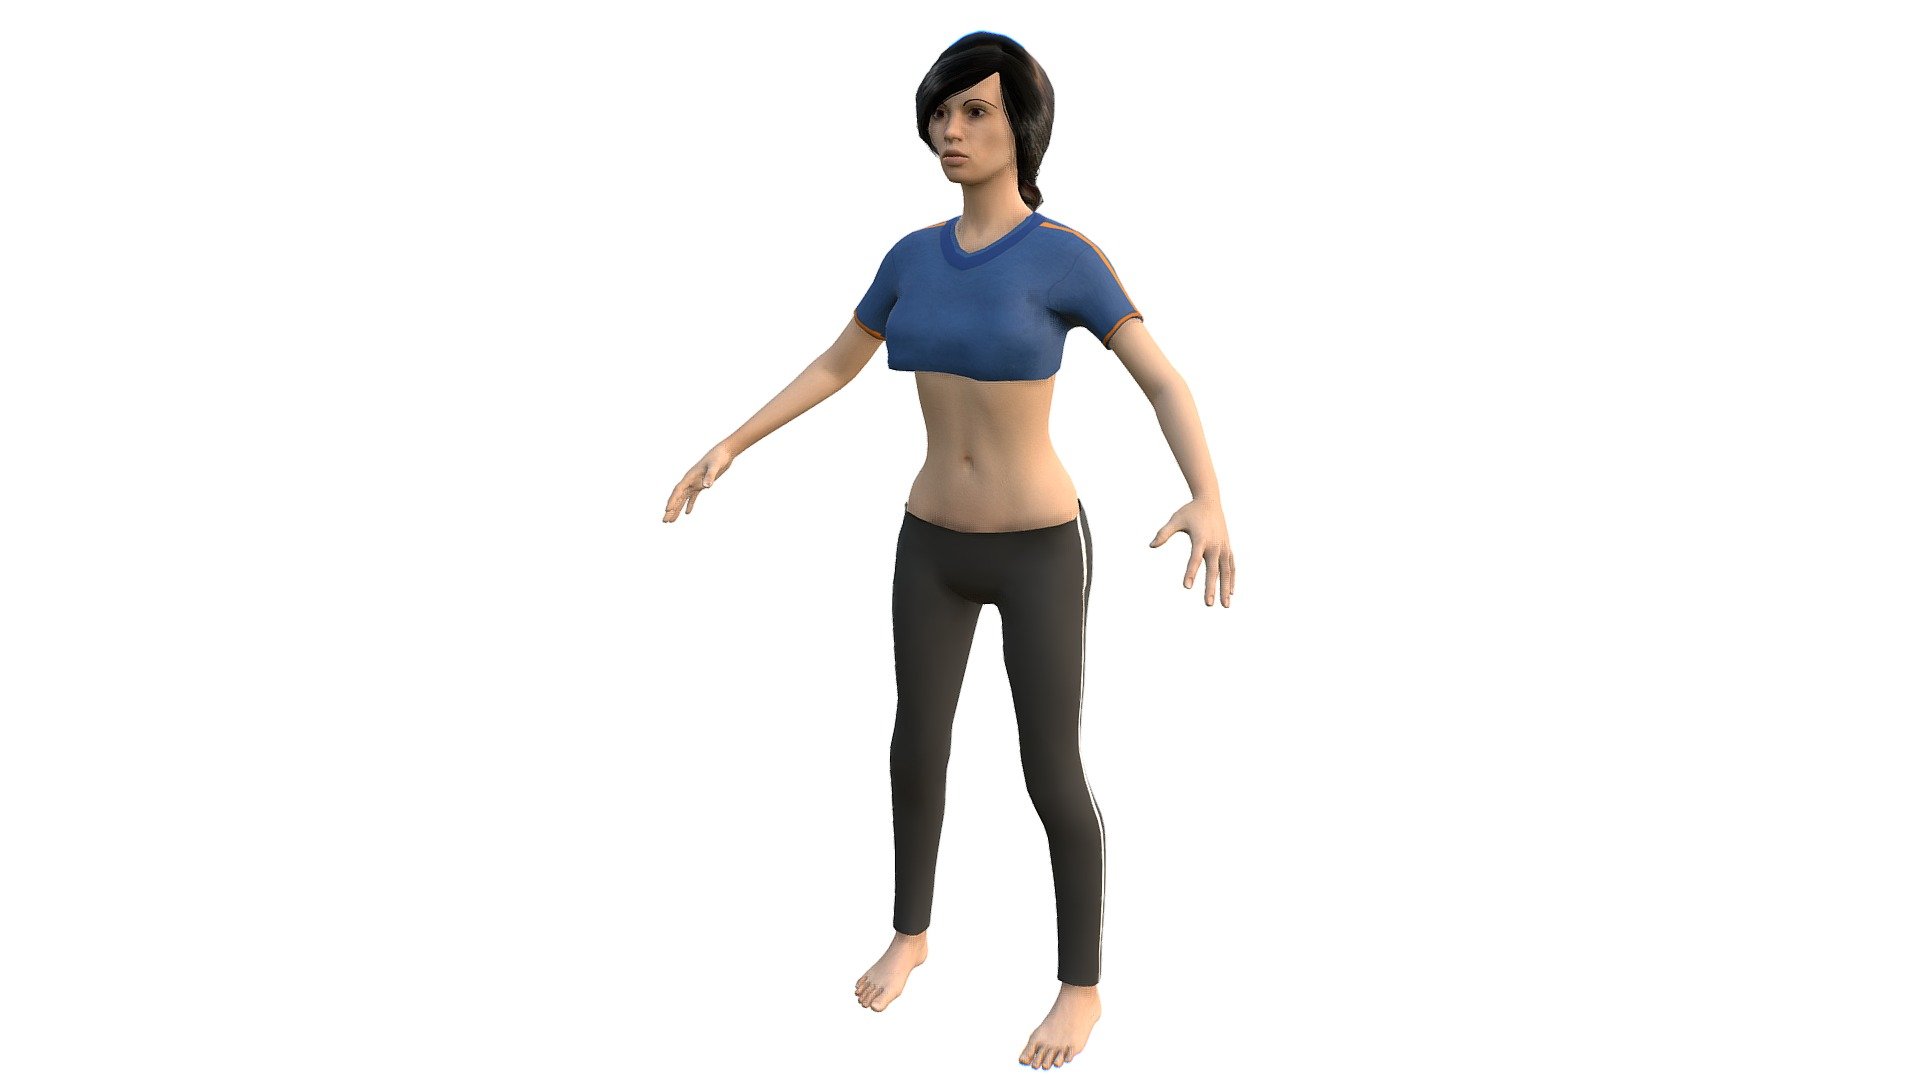 Sport Girl low-poly 3d model ready for Virtual Reality (VR), Augmented Reality (AR), games and other real-time apps.

Sport Girl 3D Model Rigged and Game Ready Skeleton optimized for game engines.

53 bones including Facial bones, hands and feet (eyes, tongue, teeth&hellip;)

21.3k faces 
23.6k vertices

All textures are included 2048 x 2048 px 3d model